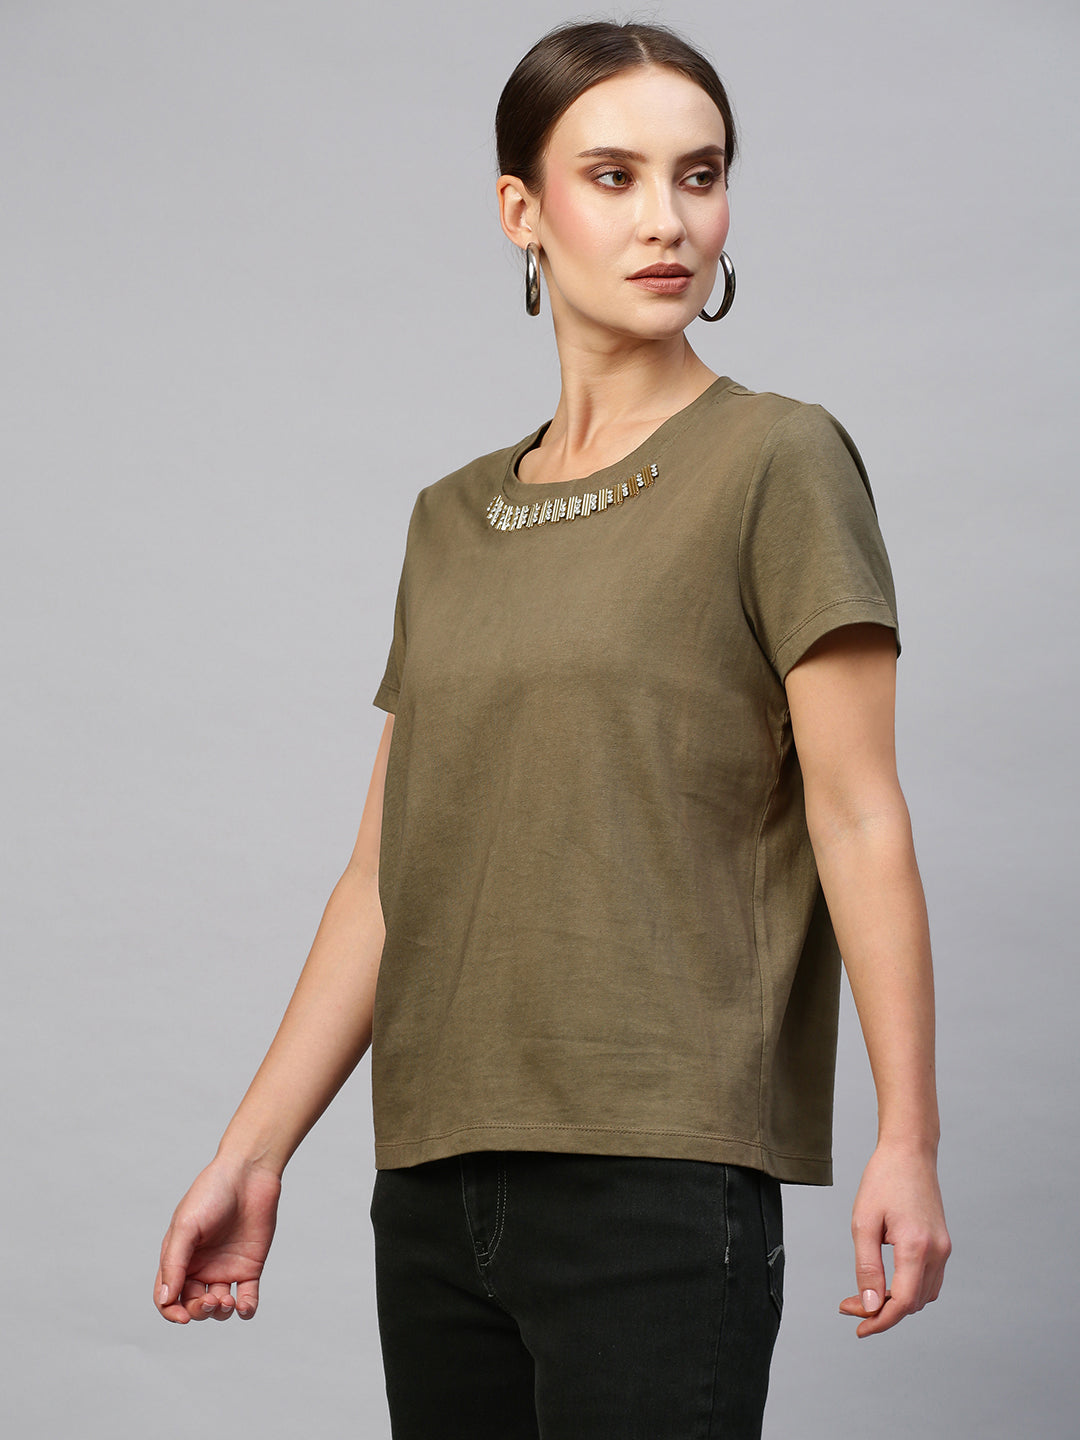 Cotton Jersey Embellished Cap Sleeve Tee